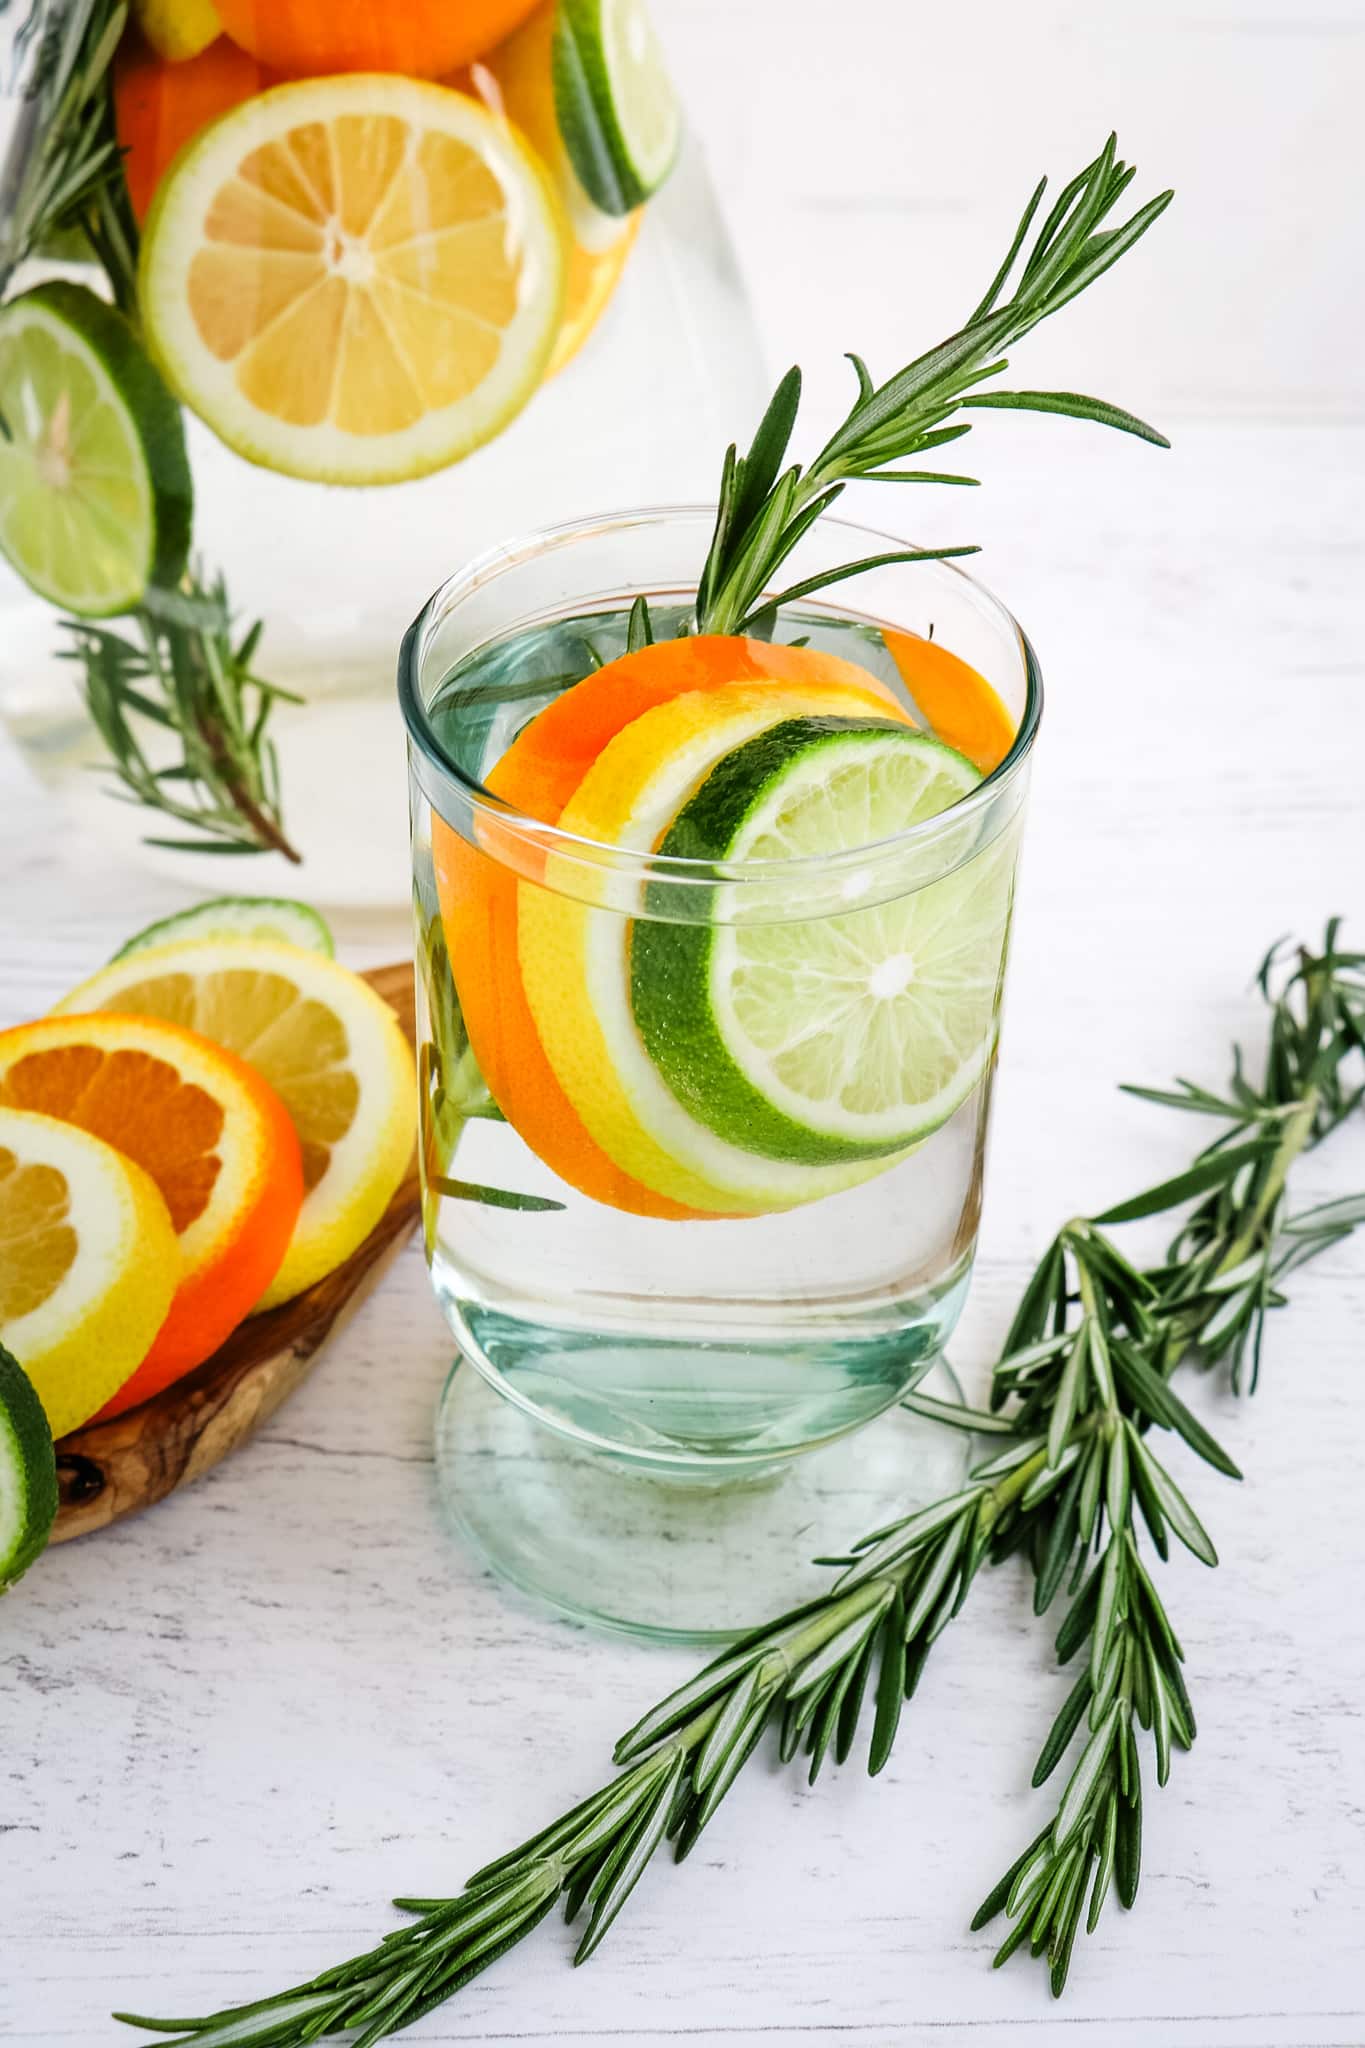 A glass of rosemary citrus water with fresh rosemary sprigs on the side and sliced lemon, lime and orange in the glass.